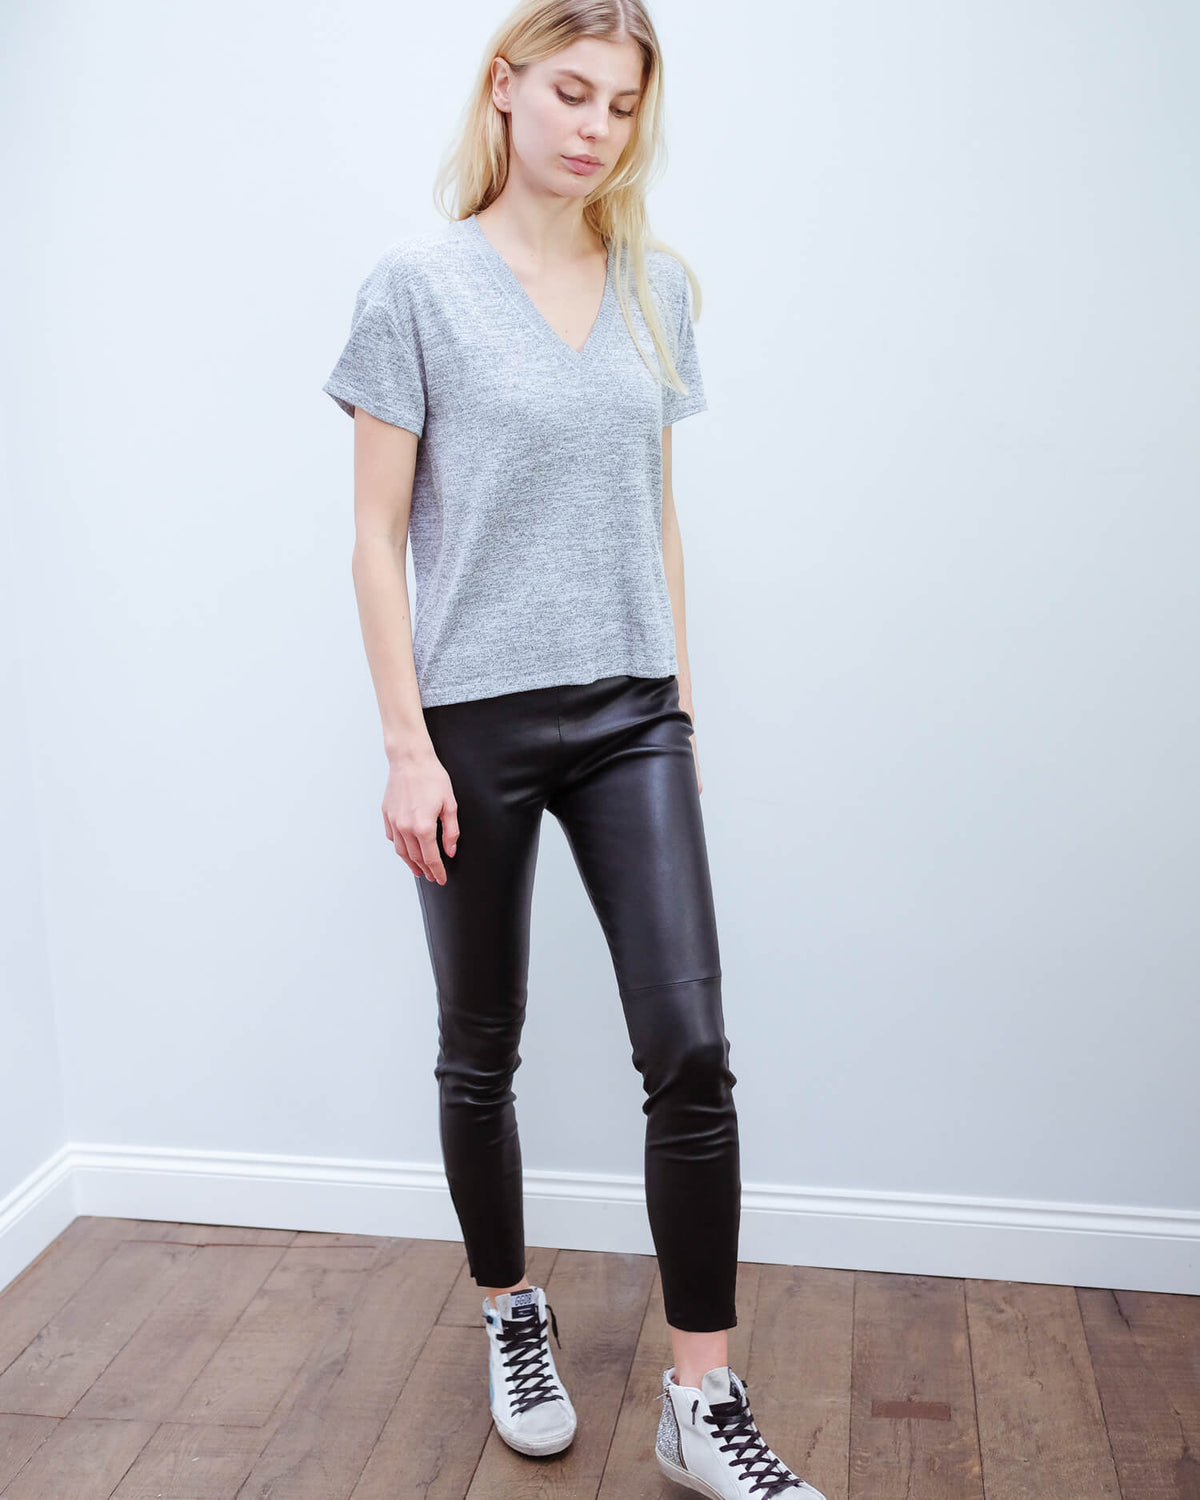 MM Arcadia leather trouser in black